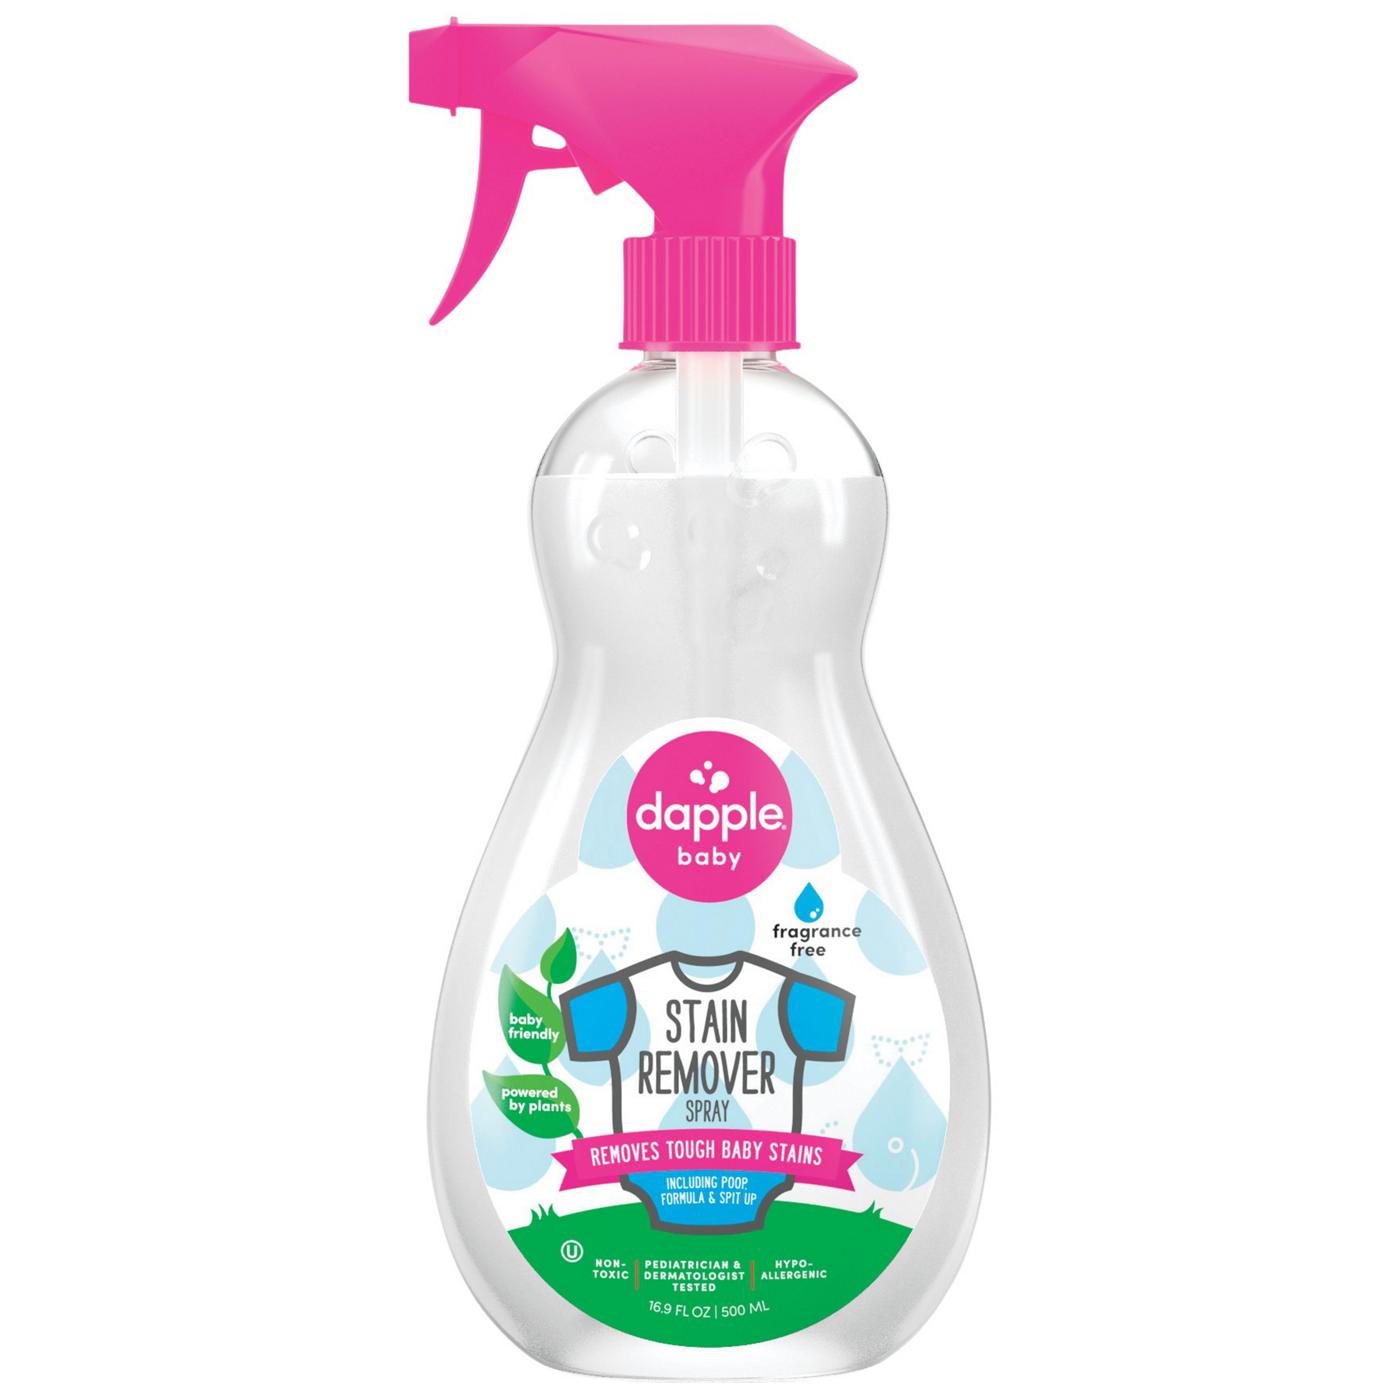 Dapple Baby Fragrance Free Stain Remover Spray; image 1 of 2